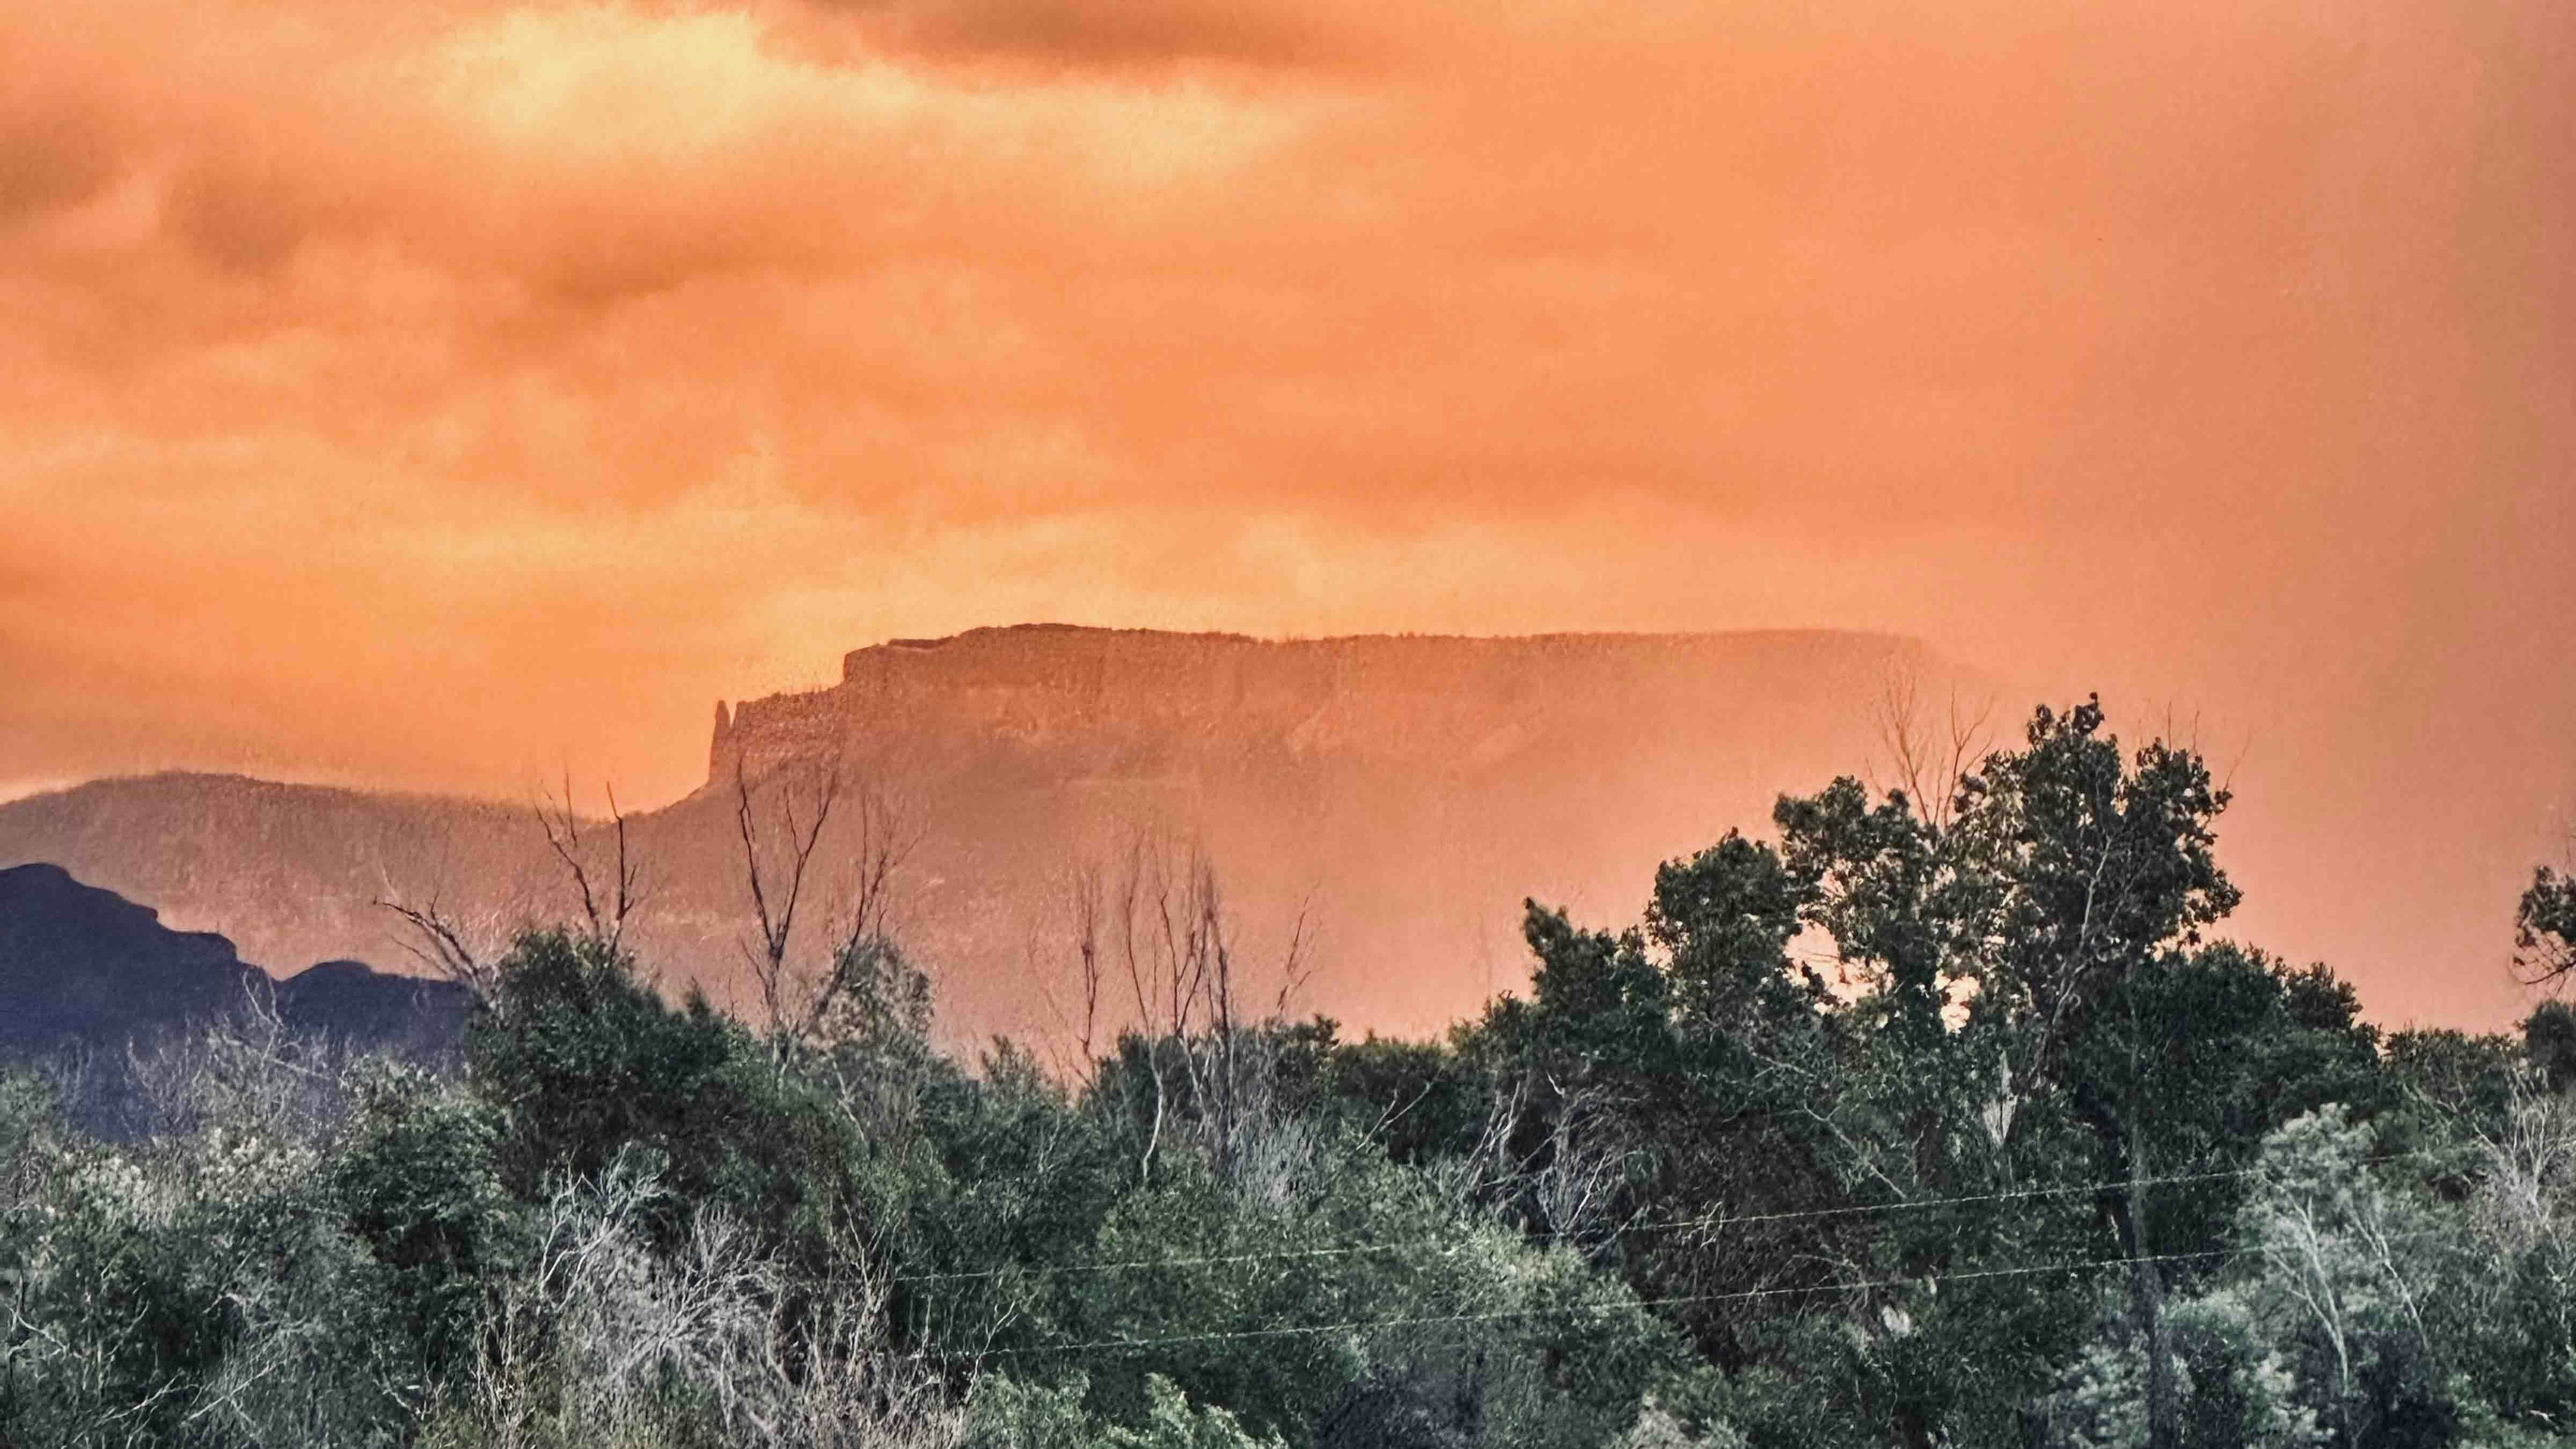 "Copman's Tomb in a summer storm at sunset. Big Horn County, Wyoming."